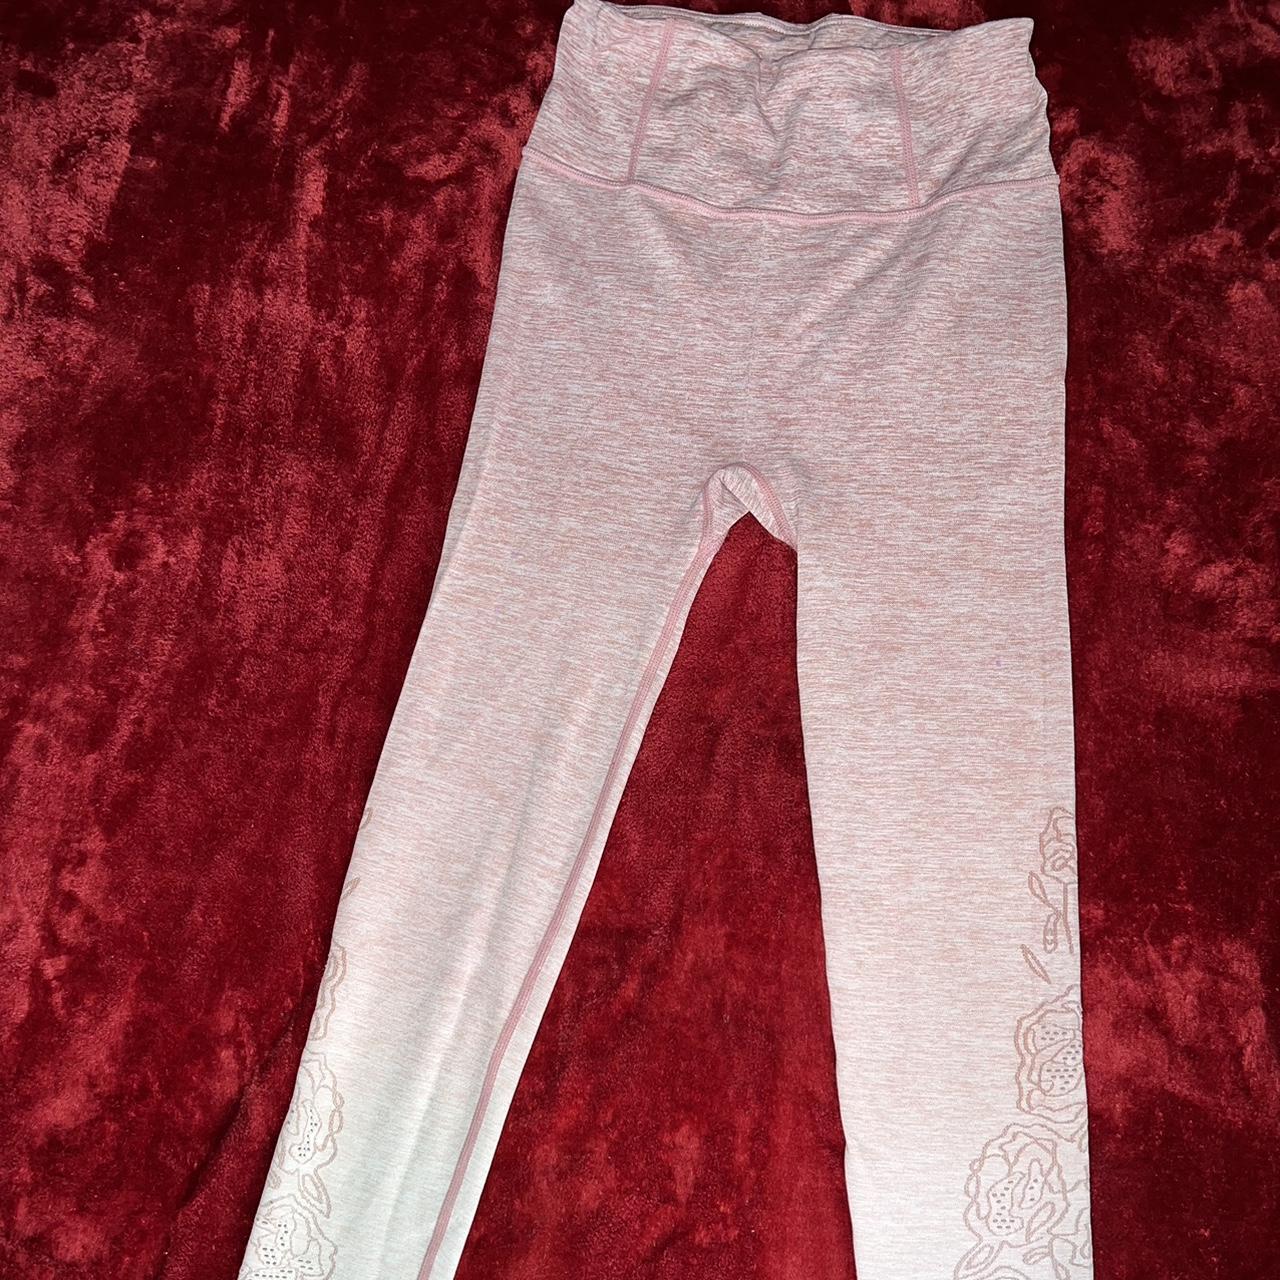 Basic Editions Pink Girl's Leggings Size Small - Depop